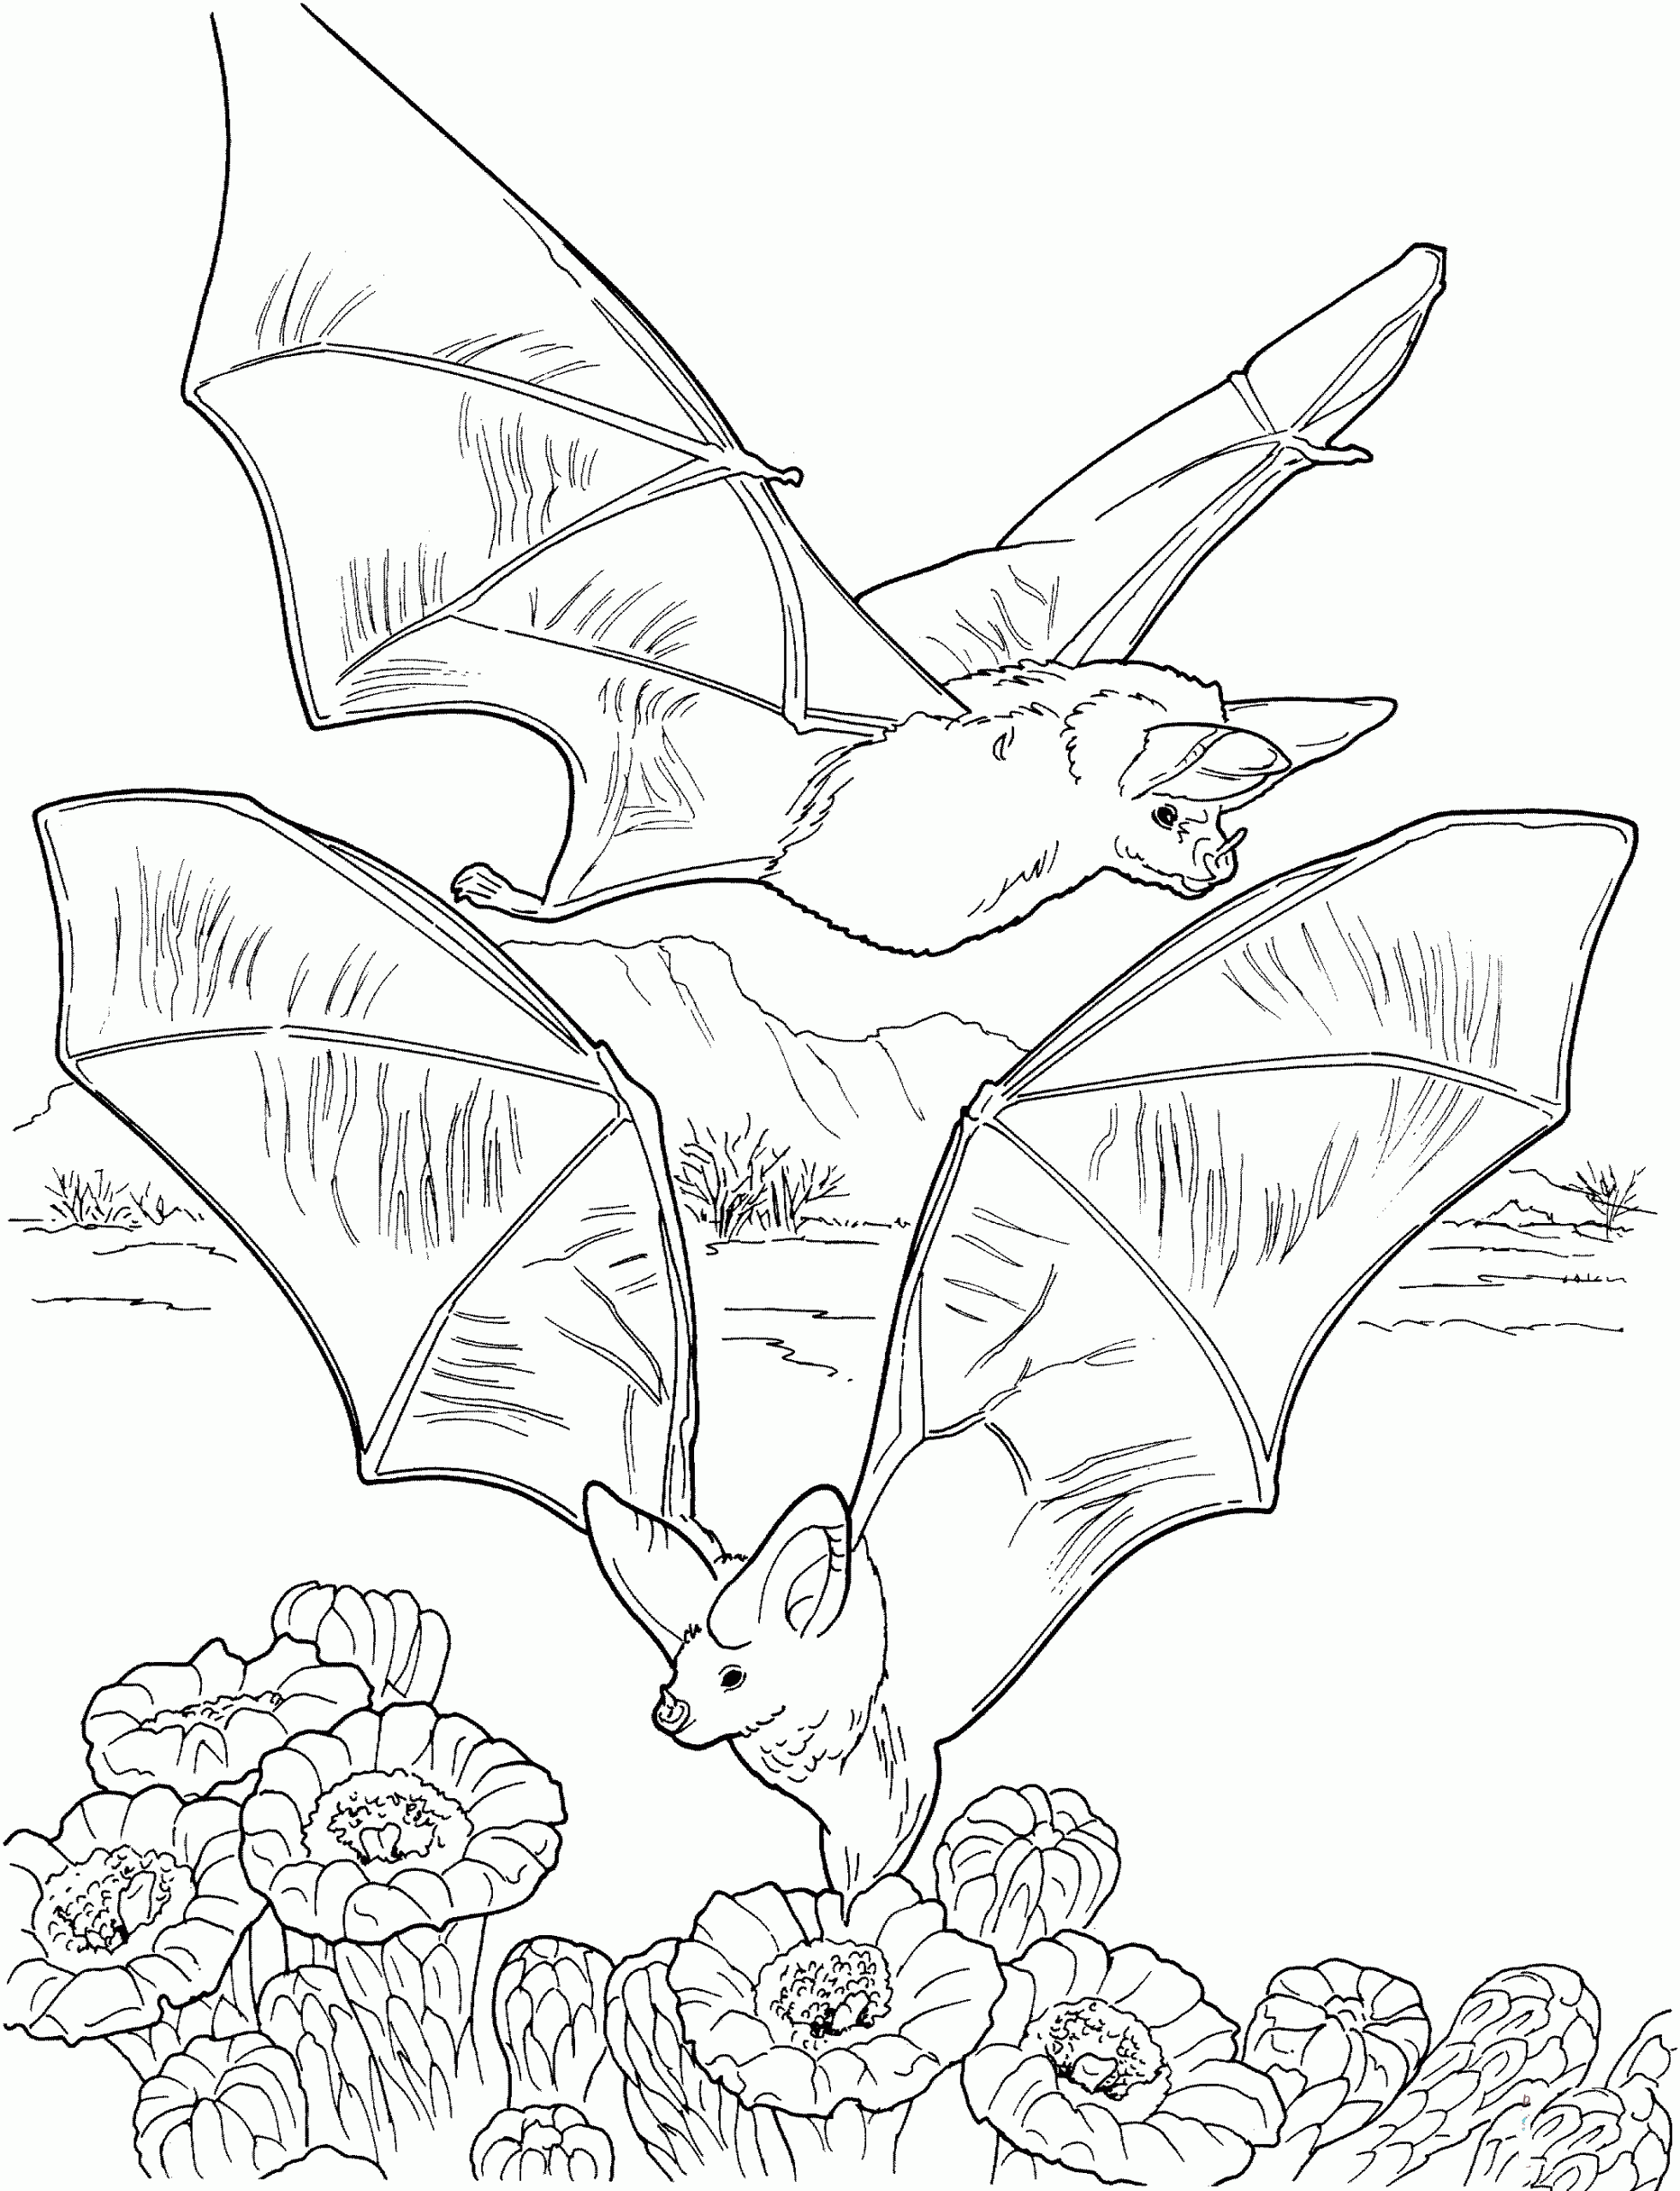 Two Bats Gathering NectarColoring Page